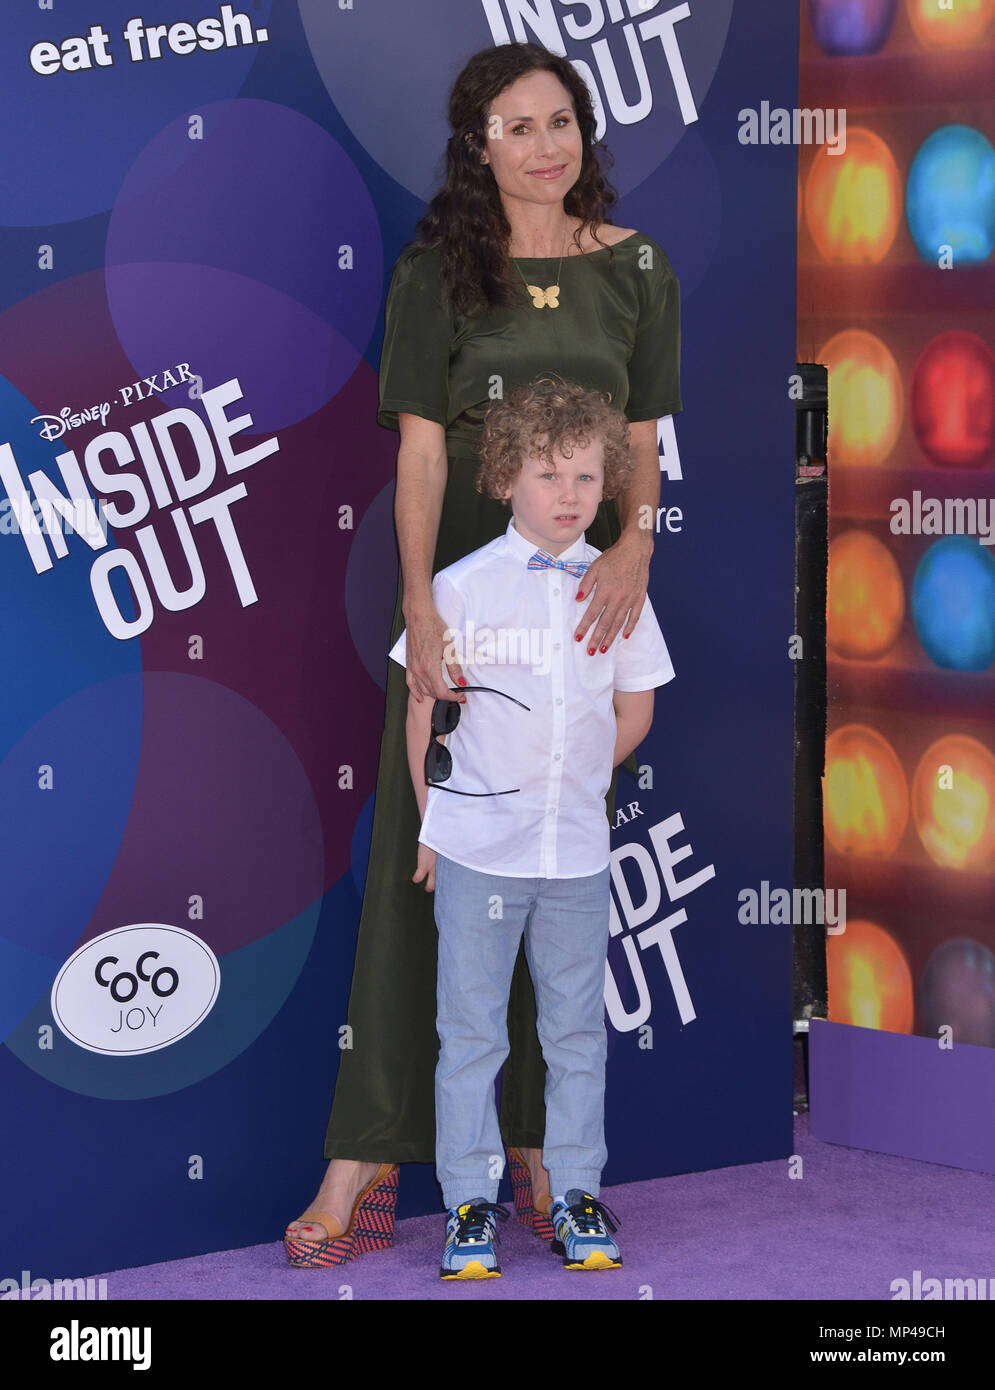 Minnie Driver and son Henry Story Driver 118 at the  Inside Out Premiere at the El Capitan Theatre in Los Angeles. June, 8, 2015.Minnie Driver and son Henry Story Driver 118 ------------- Red Carpet Event, Vertical, USA, Film Industry, Celebrities,  Photography, Bestof, Arts Culture and Entertainment, Topix Celebrities fashion /  Vertical, Best of, Event in Hollywood Life - California,  Red Carpet and backstage, USA, Film Industry, Celebrities,  movie celebrities, TV celebrities, Music celebrities, Photography, Bestof, Arts Culture and Entertainment,  Topix, vertical,  family from from the yea Stock Photo